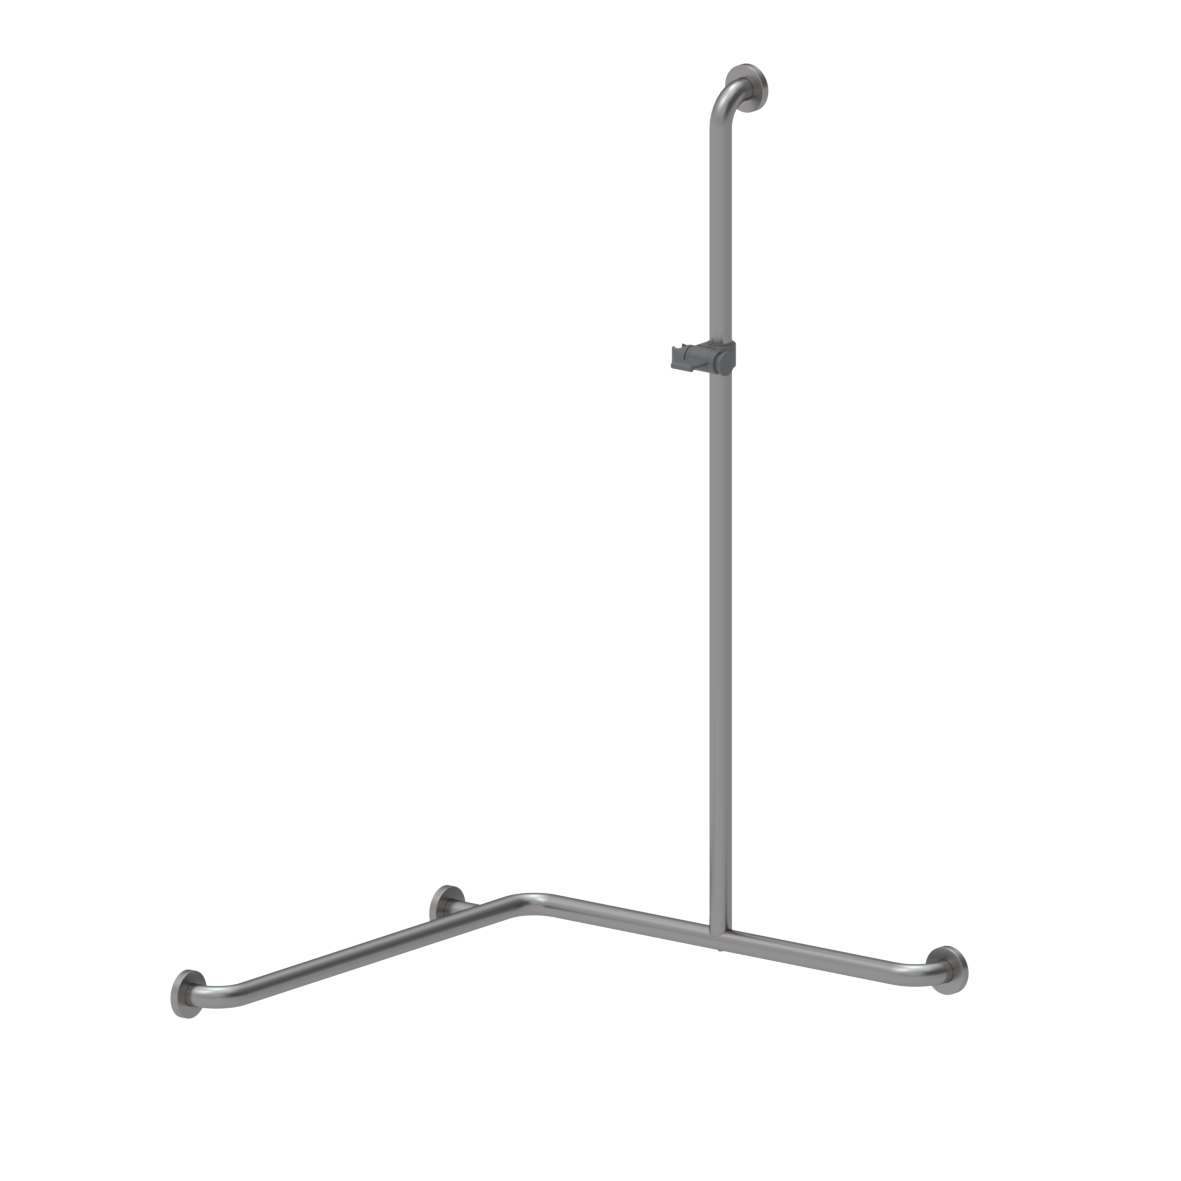 Inox Care Shower handrail, with shower head rail central, right, 750 x 750 x 1200 mm, Stainless steel, shower head holder, colour dark grey (018)